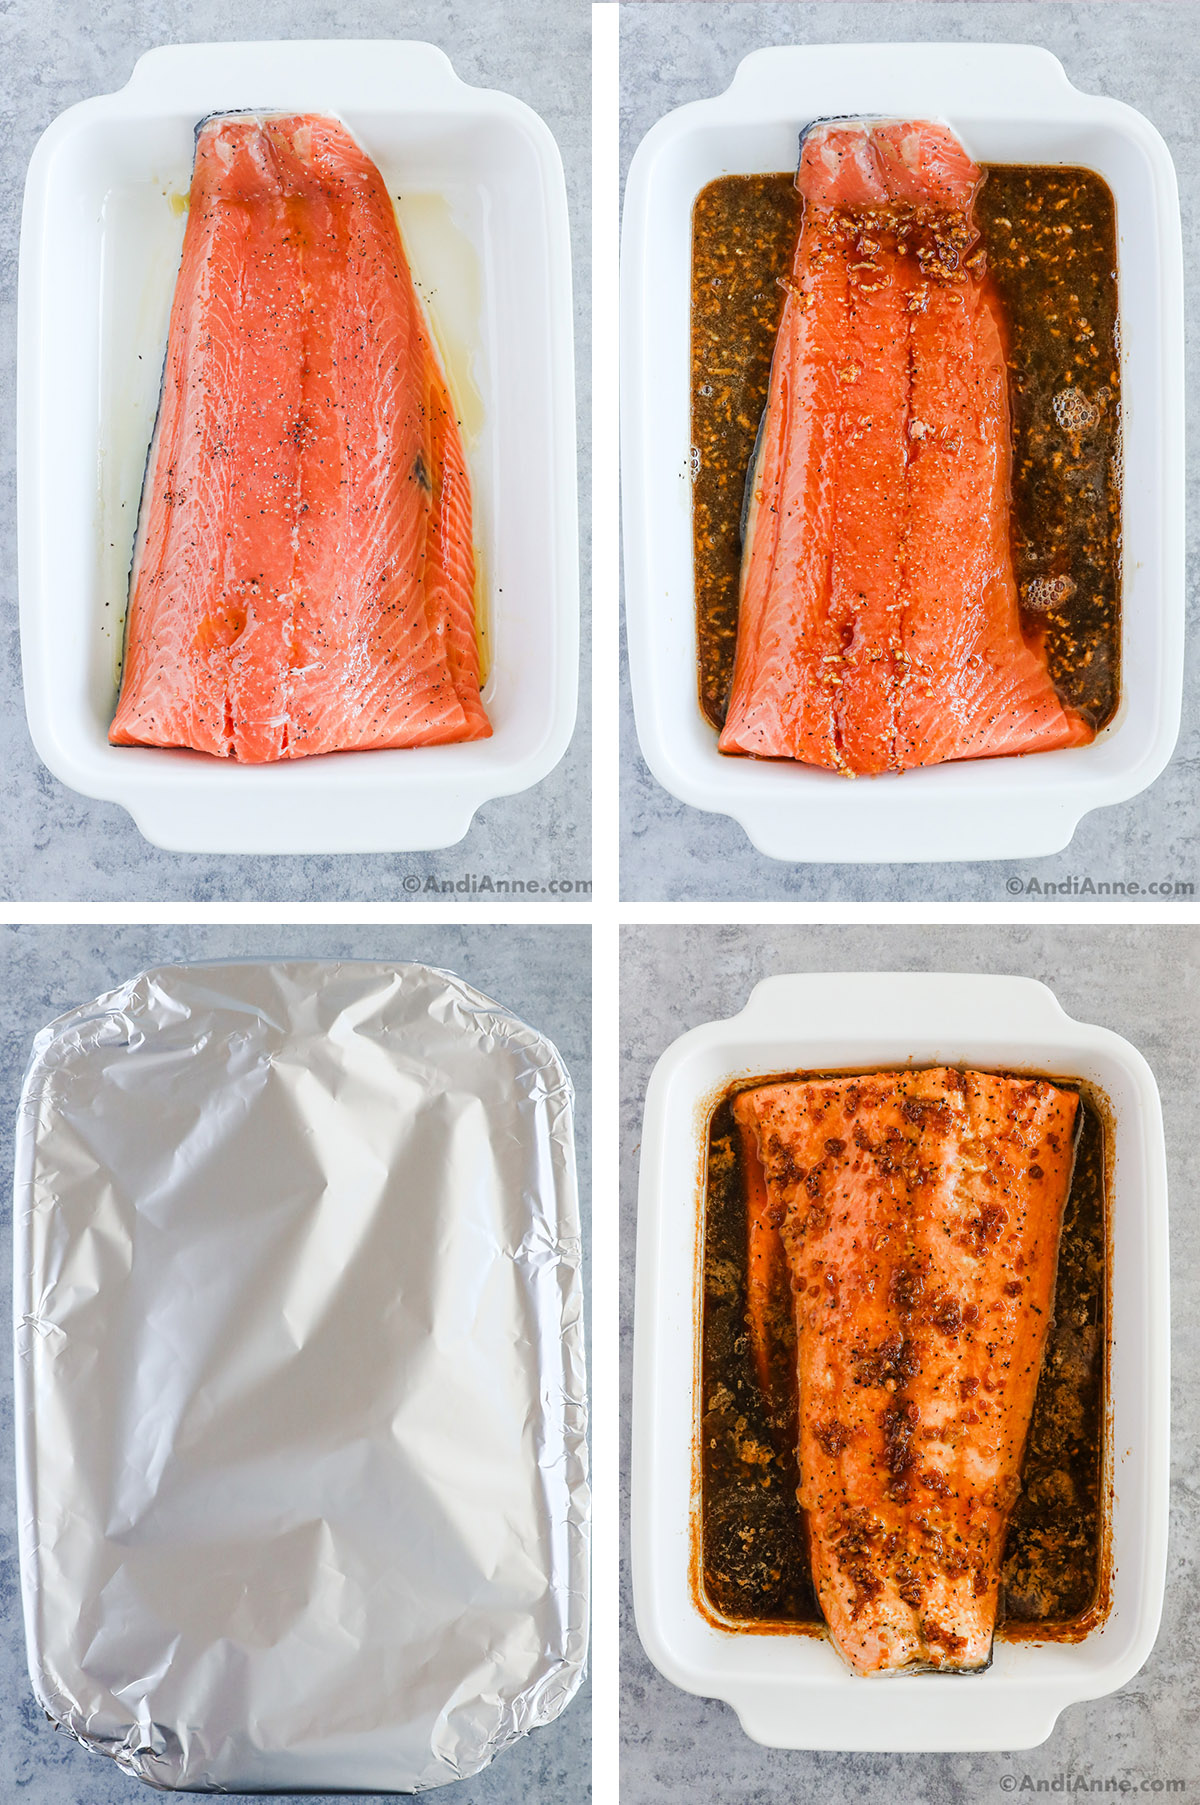 Four images together of casserole dish with raw salmon fillet. First seasoned with salt and pepper. Second with brown sugar soy sauce added, third covered in foil, fourth baked and in sauce.